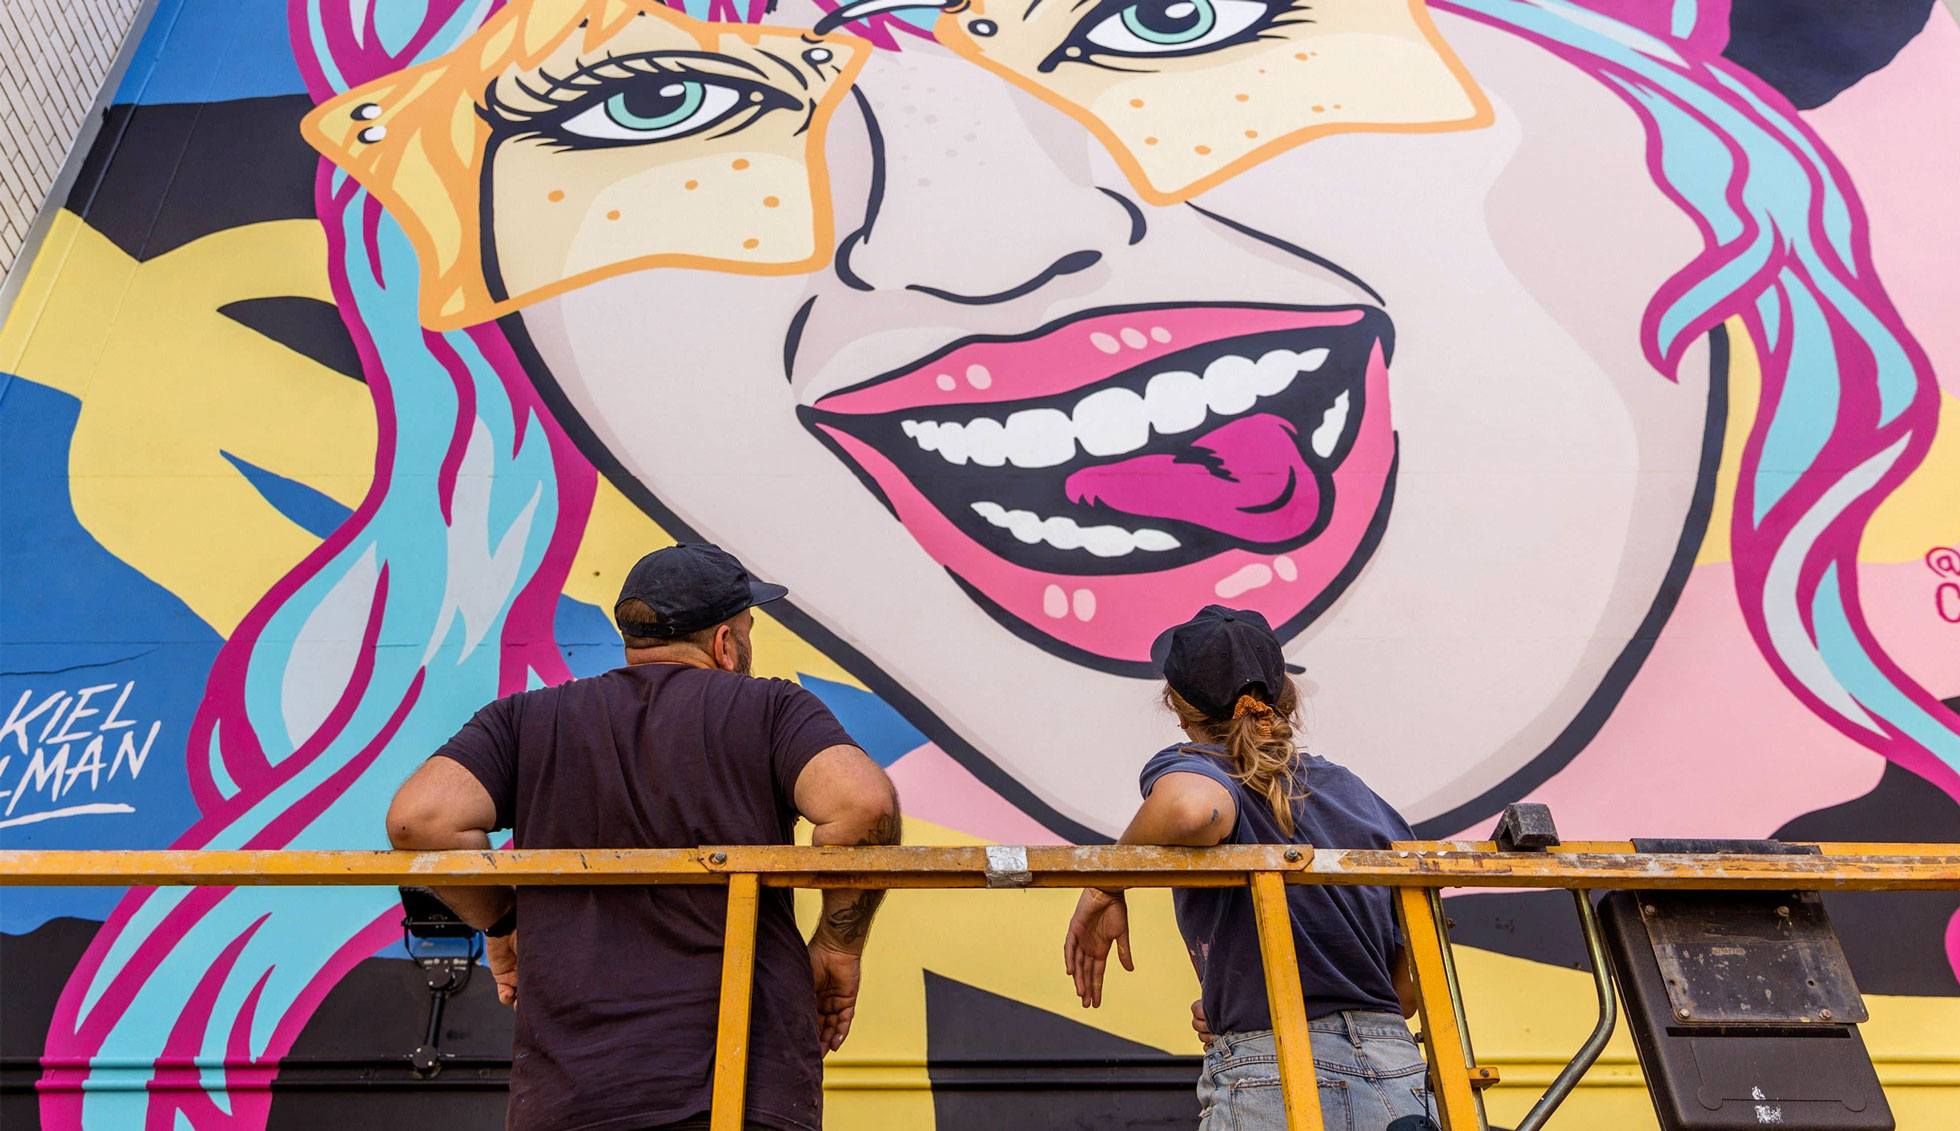 Two team members of Tillman Creative Co stand with their backs to the camera looking up at the large-scale mural they have just completed